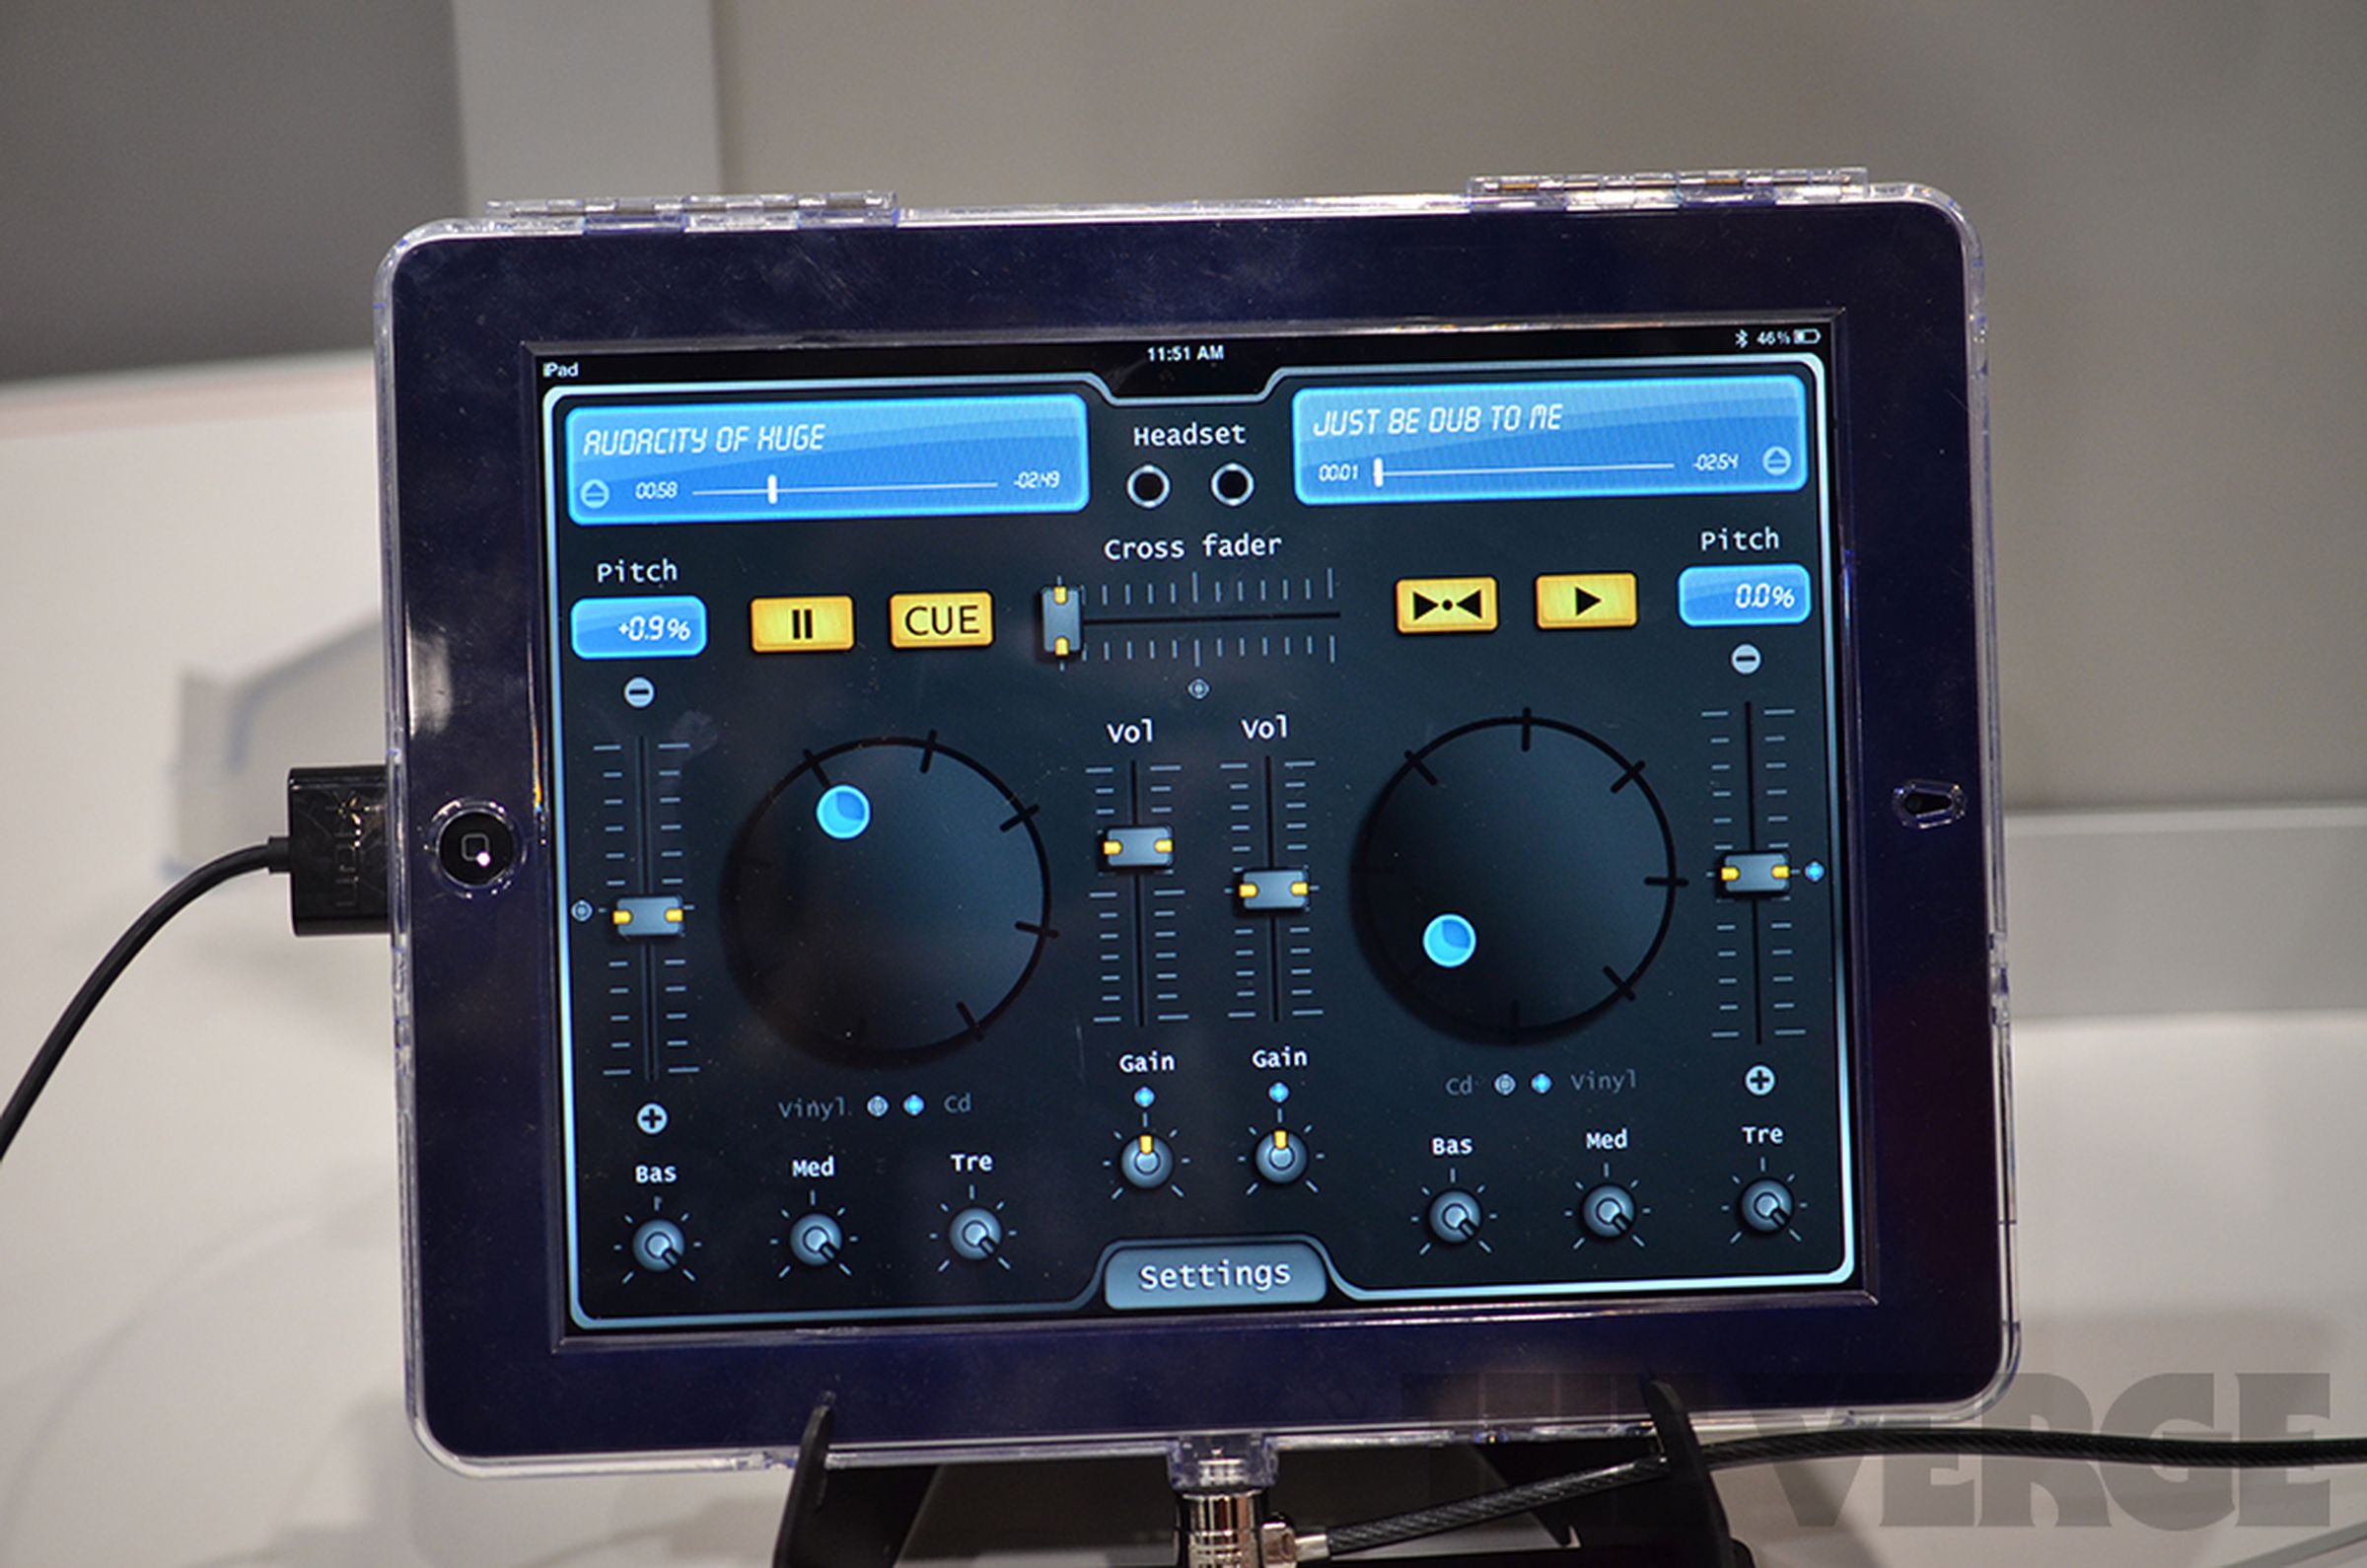 Ion musical training tools: hands-on images